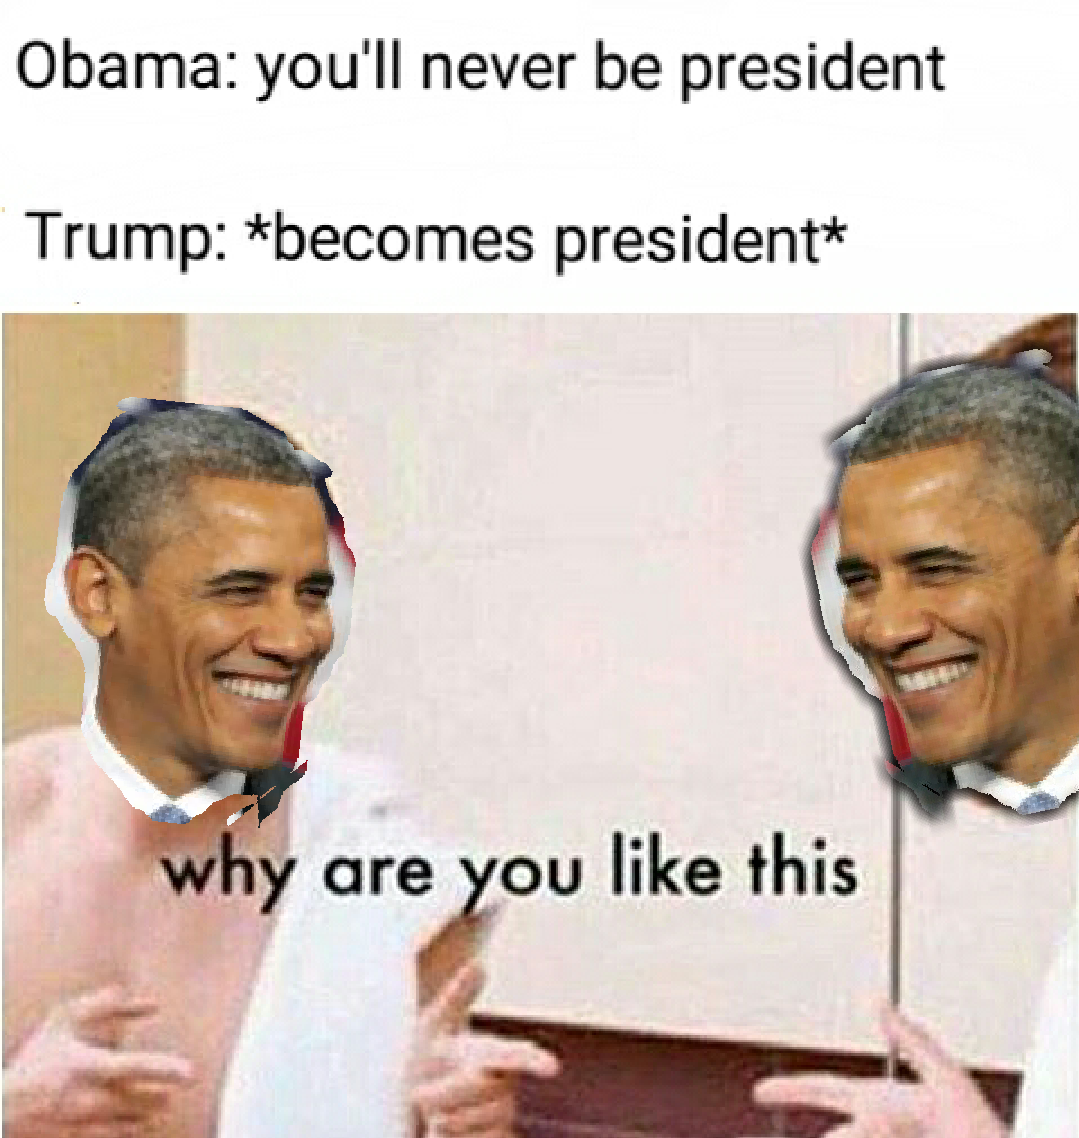 The good news is Mr. Trump, you'll never be president. - Obama